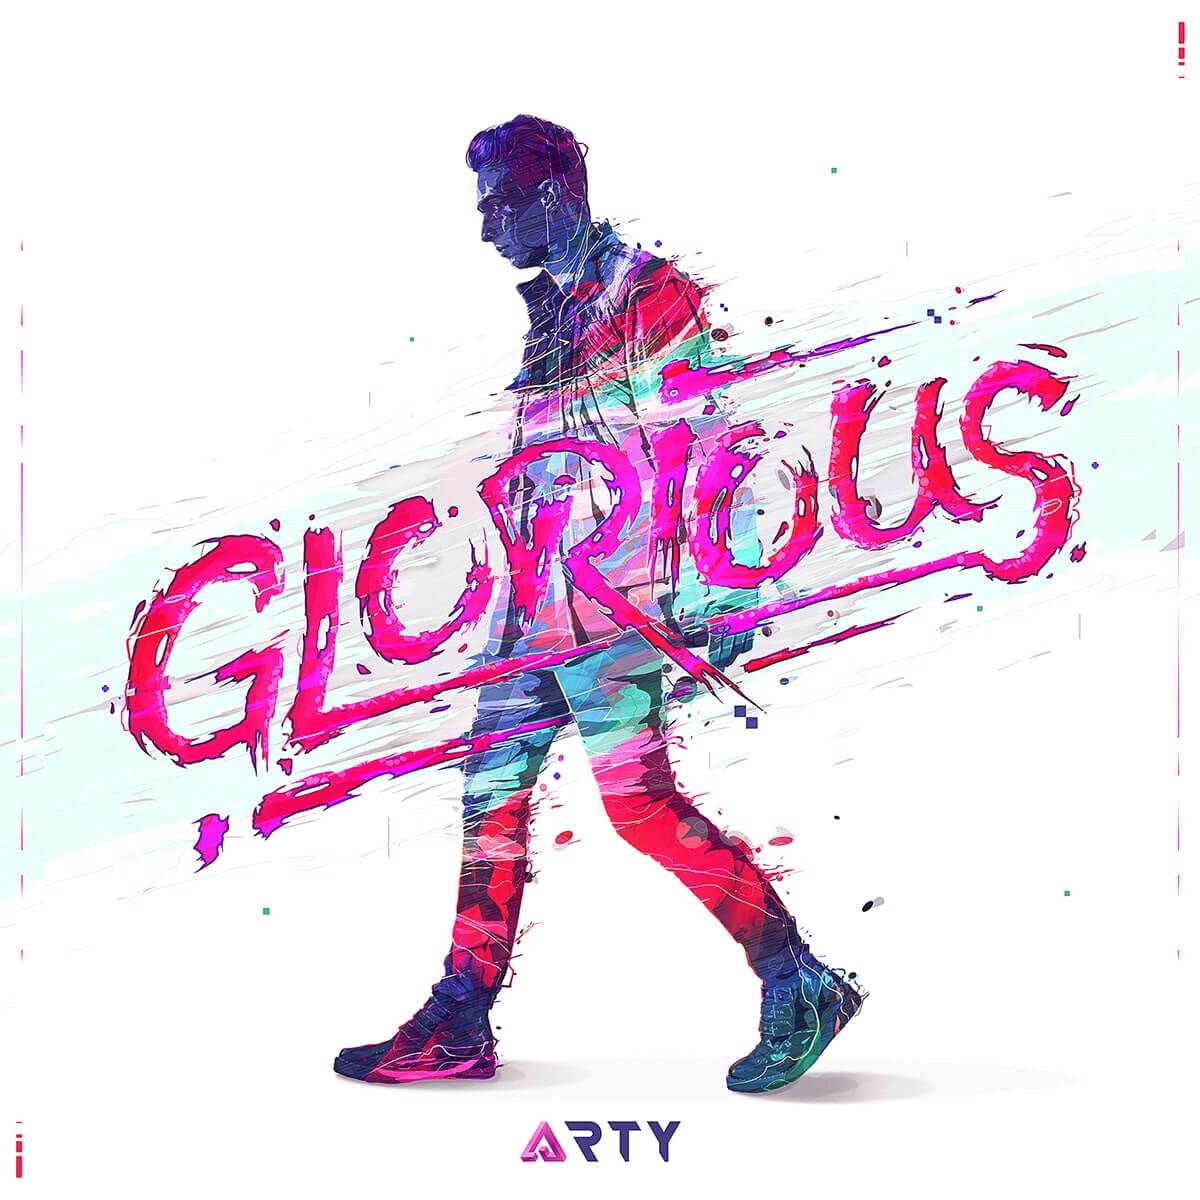 ARTY - Glorious by Mart Biemans-min